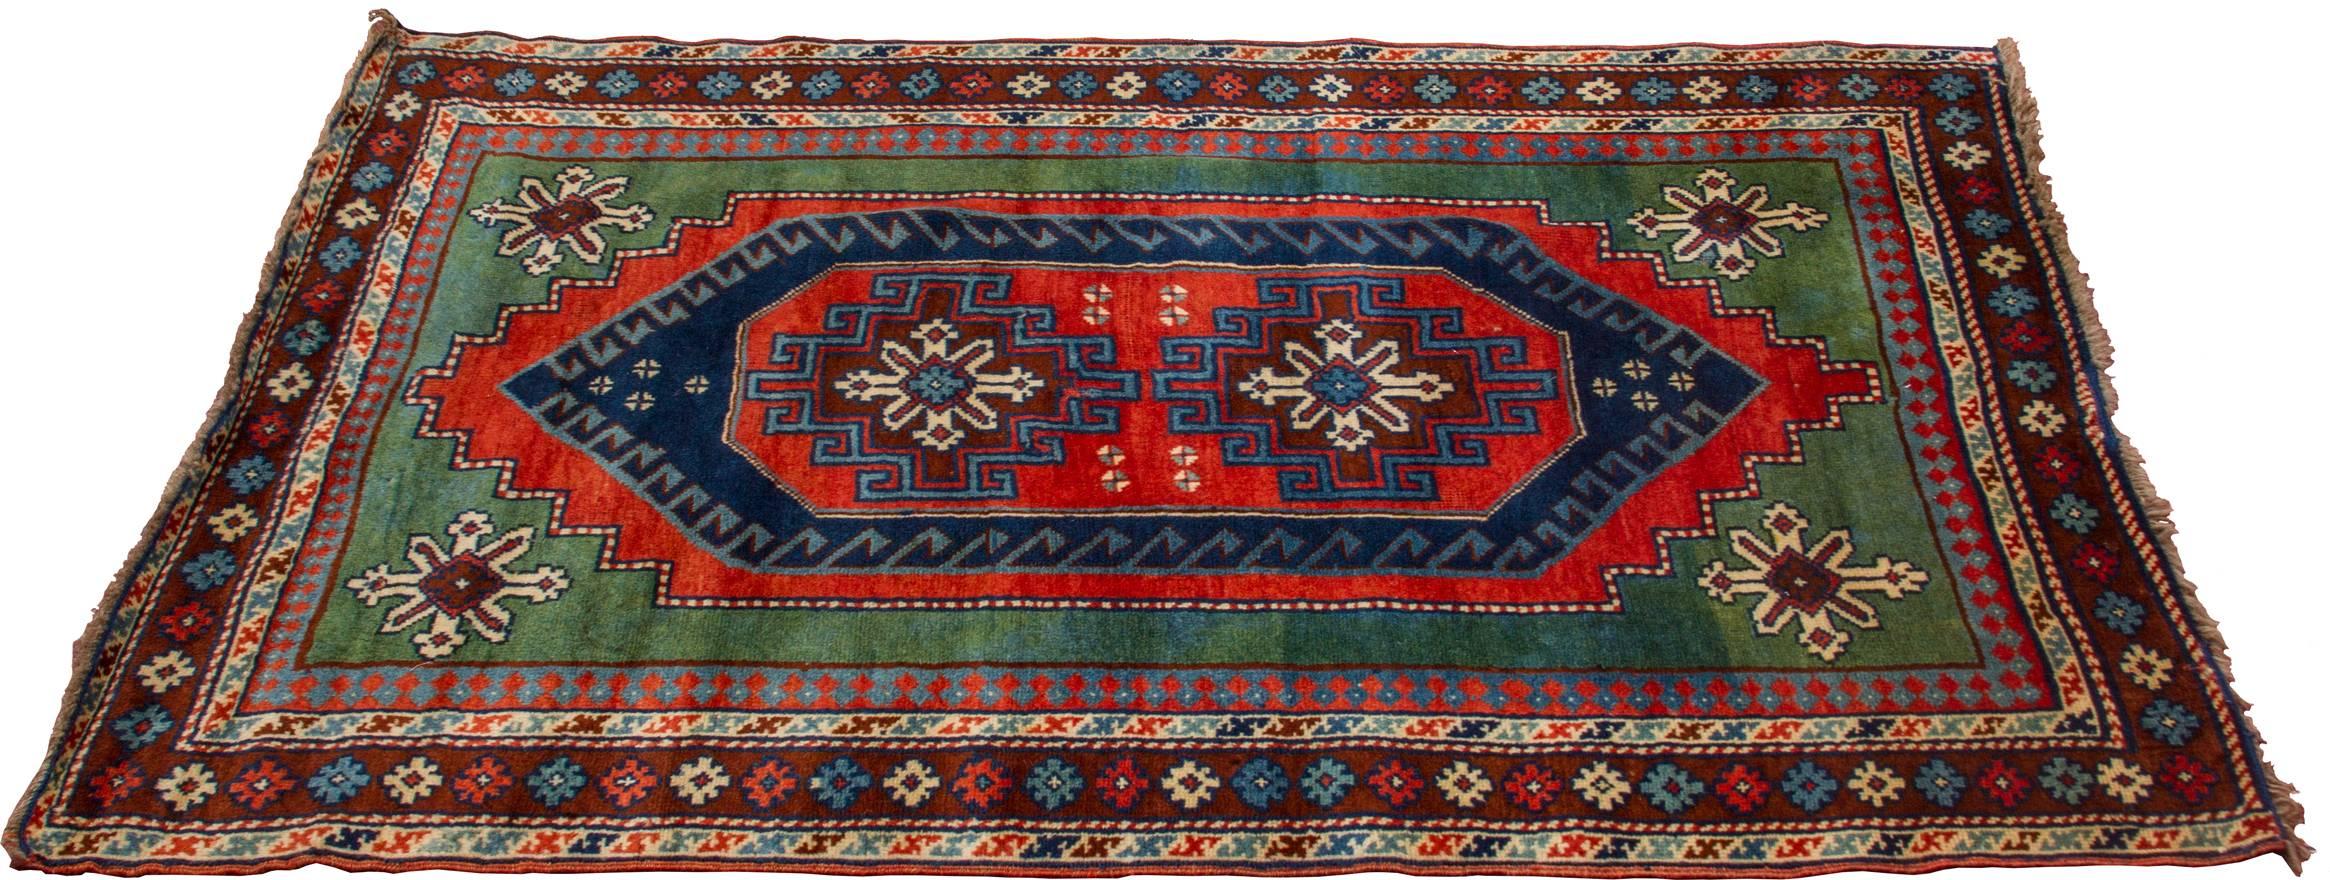 Made during the 5 Year Plan when rugs were made to resemble the rugs woven in  the Caucuses.  
This was during the First 5 Year Plan in Russia, when there was a large push towards industrialization. 
This rug was originally created in the Caucuses